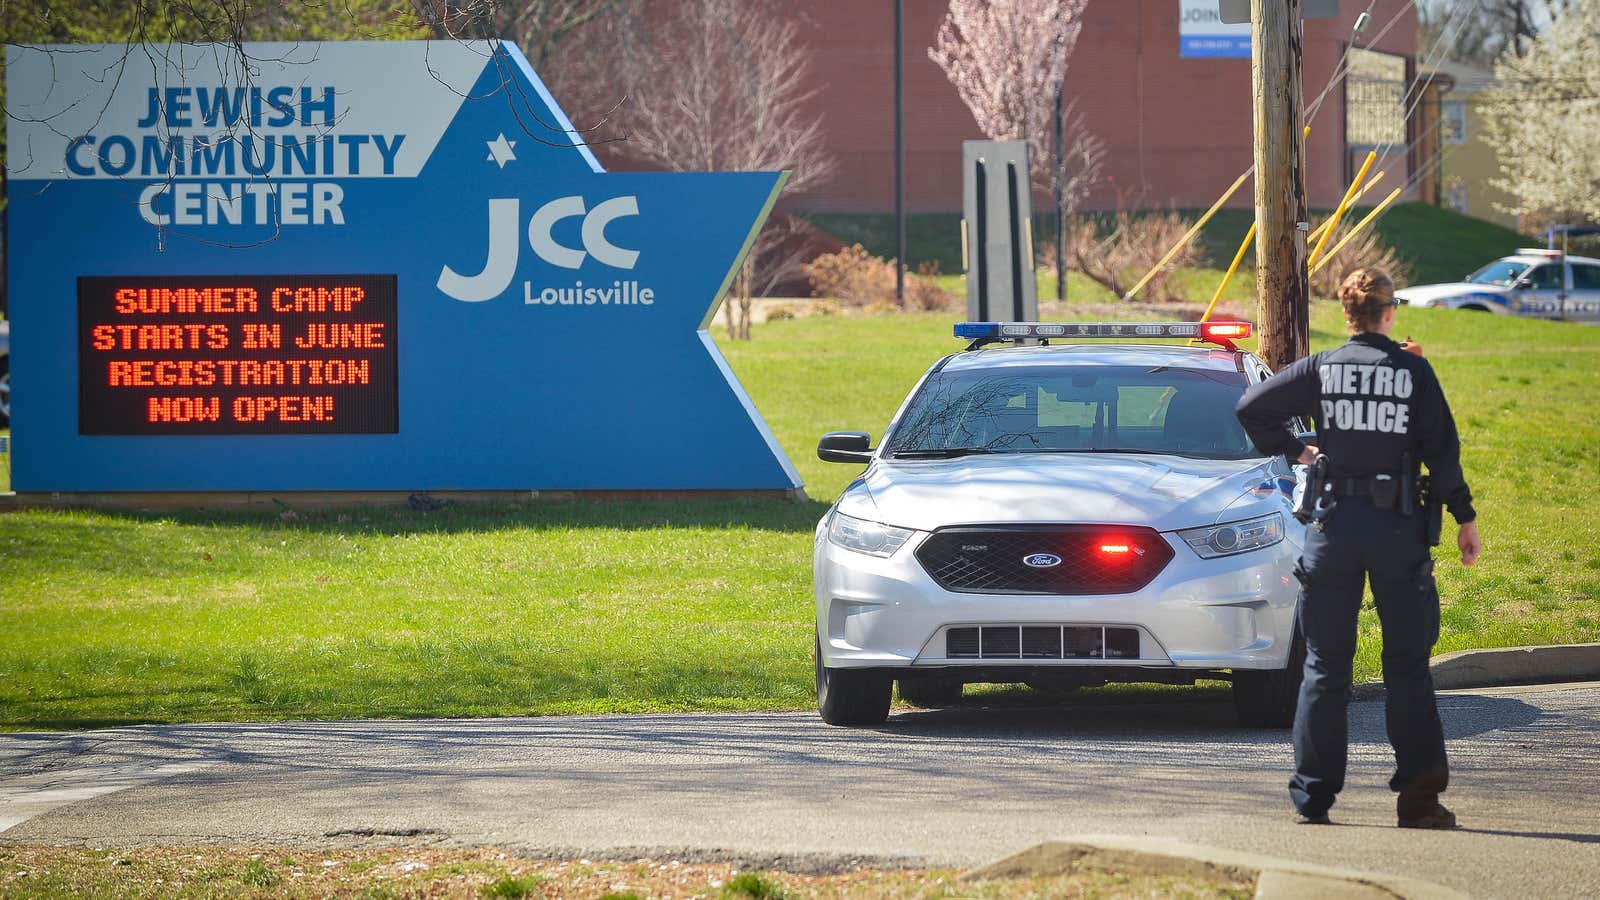 Police officers respond to a bomb threat against a Jewish Community Center in Louisville, Kentucky, in March 2017.